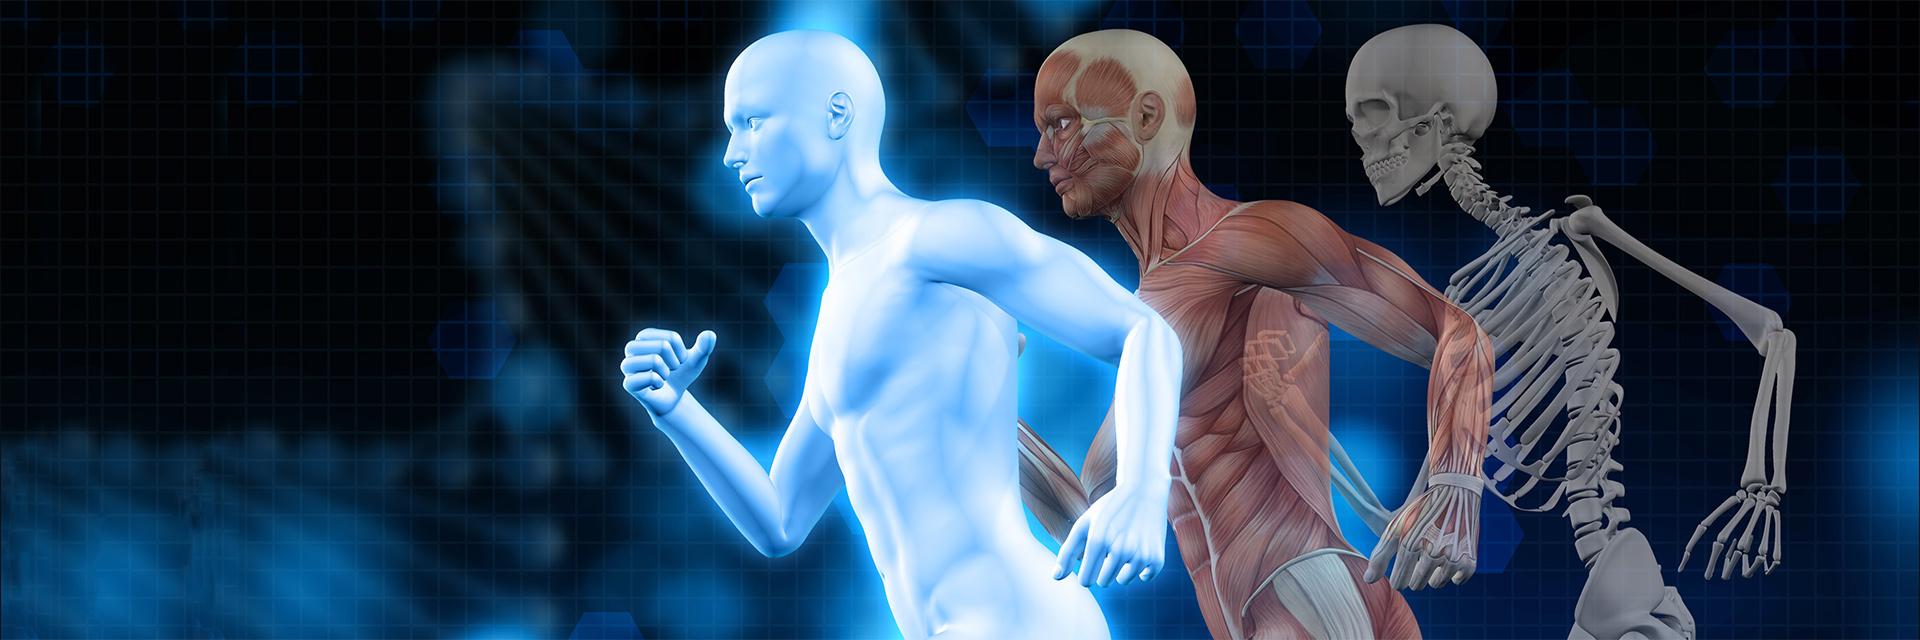 3D medical background, male figure running